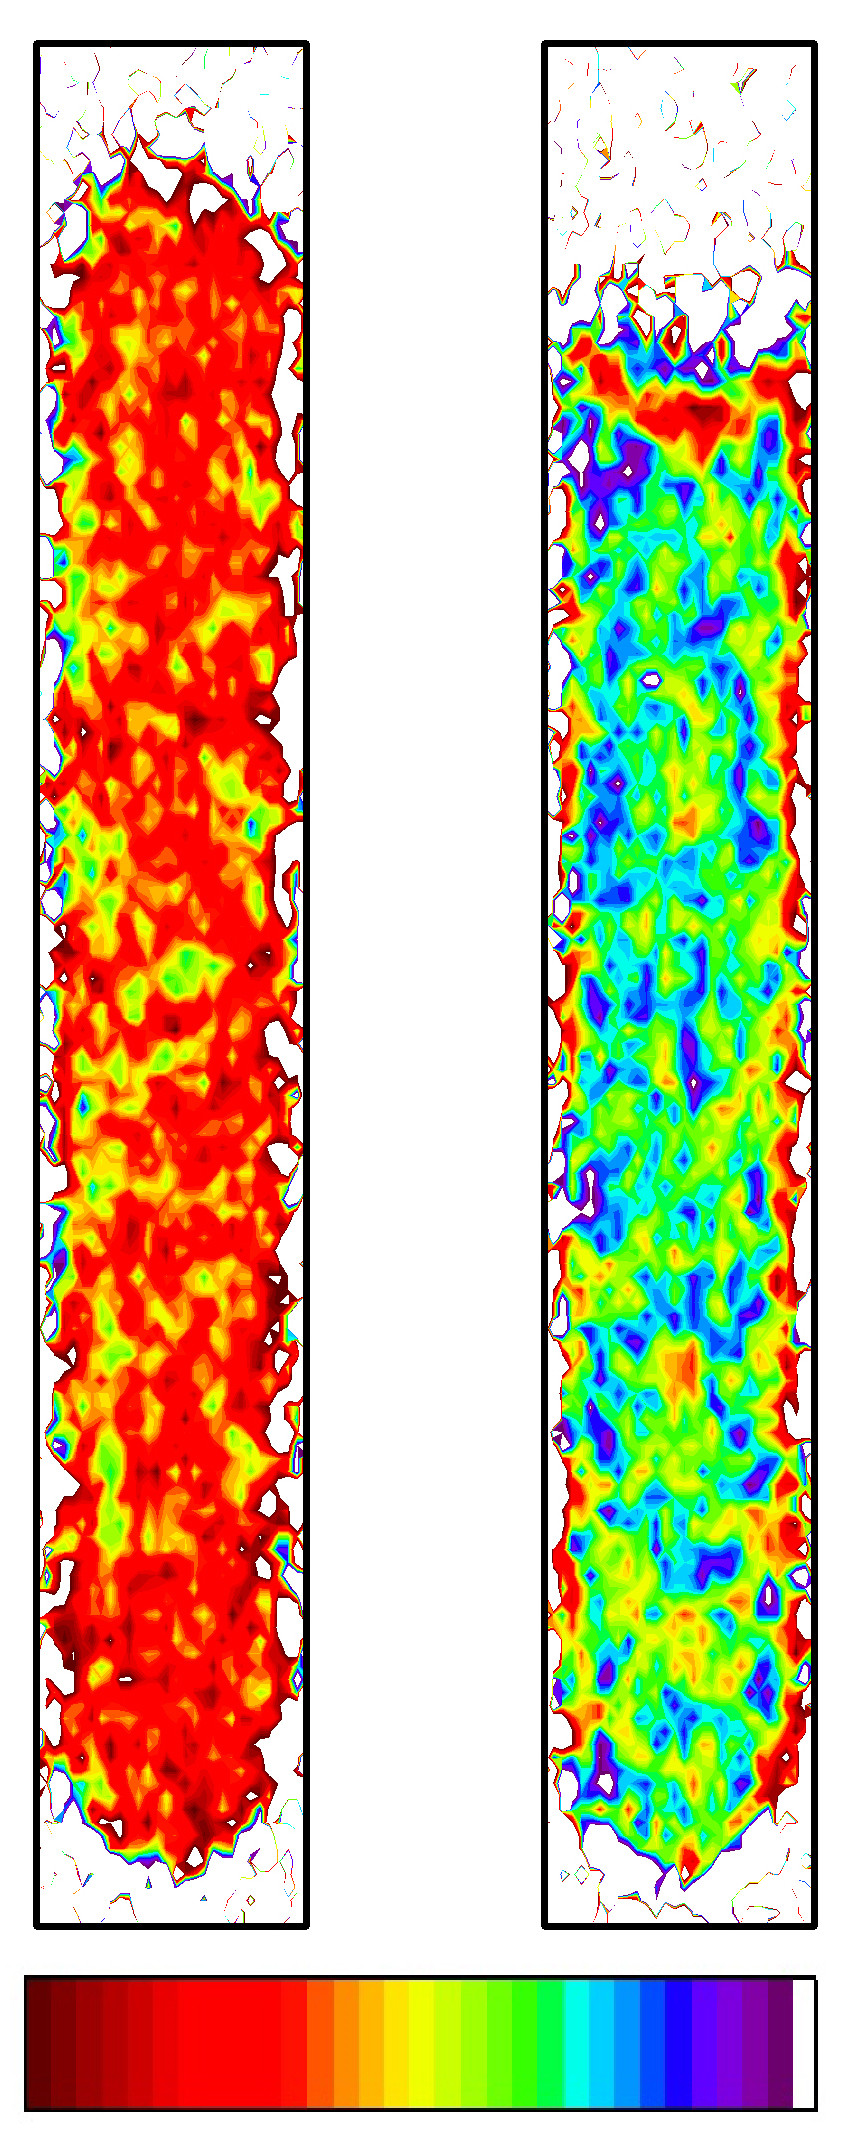 Spatial distribution of ice and water in a cylindrical water column, as measured in the present study with the new neutron imaging technique. Red means only ice present, violet only liquid water. Copyright: American Physical society